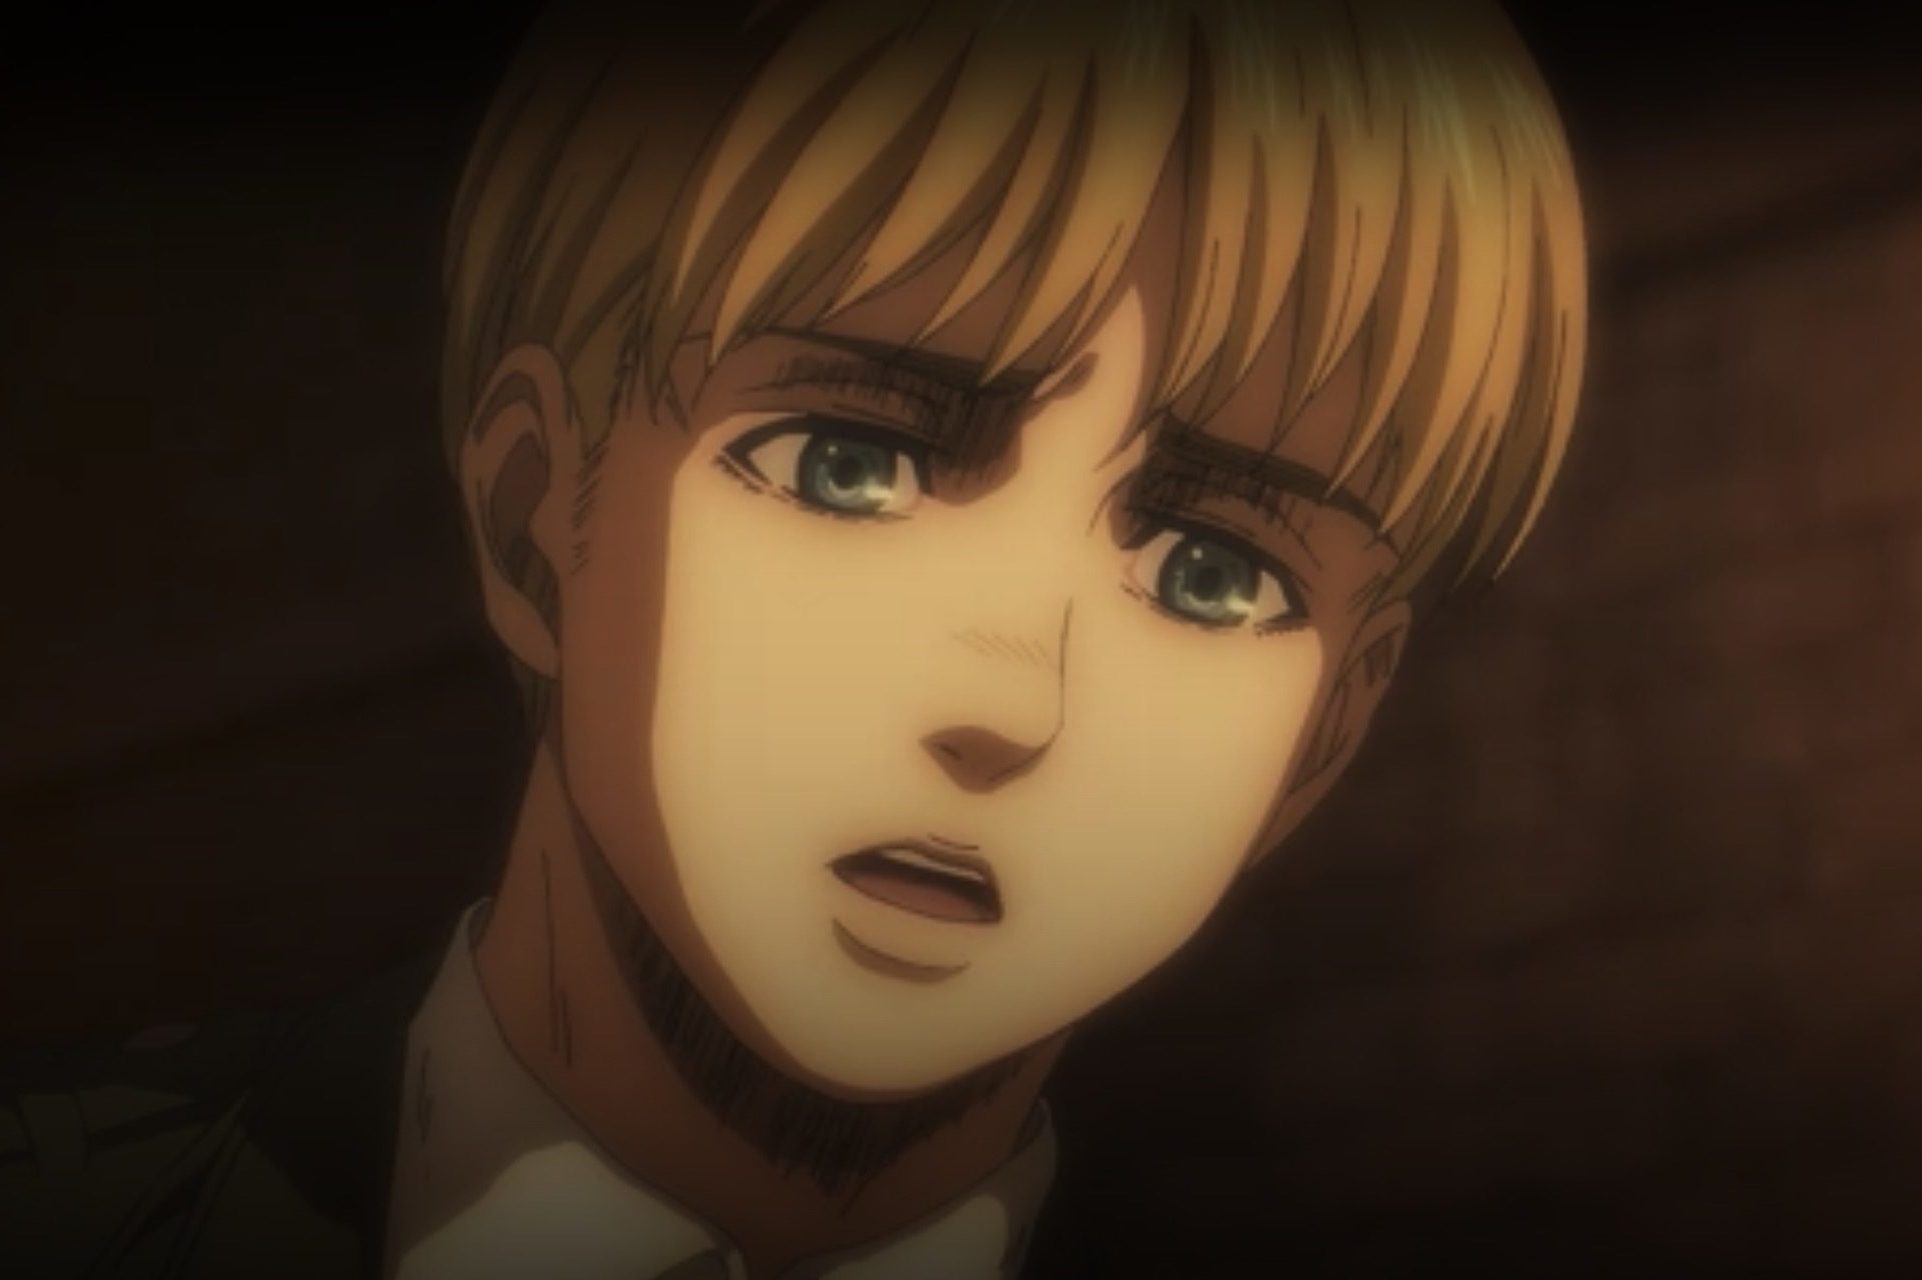 Why was Armin crying? 